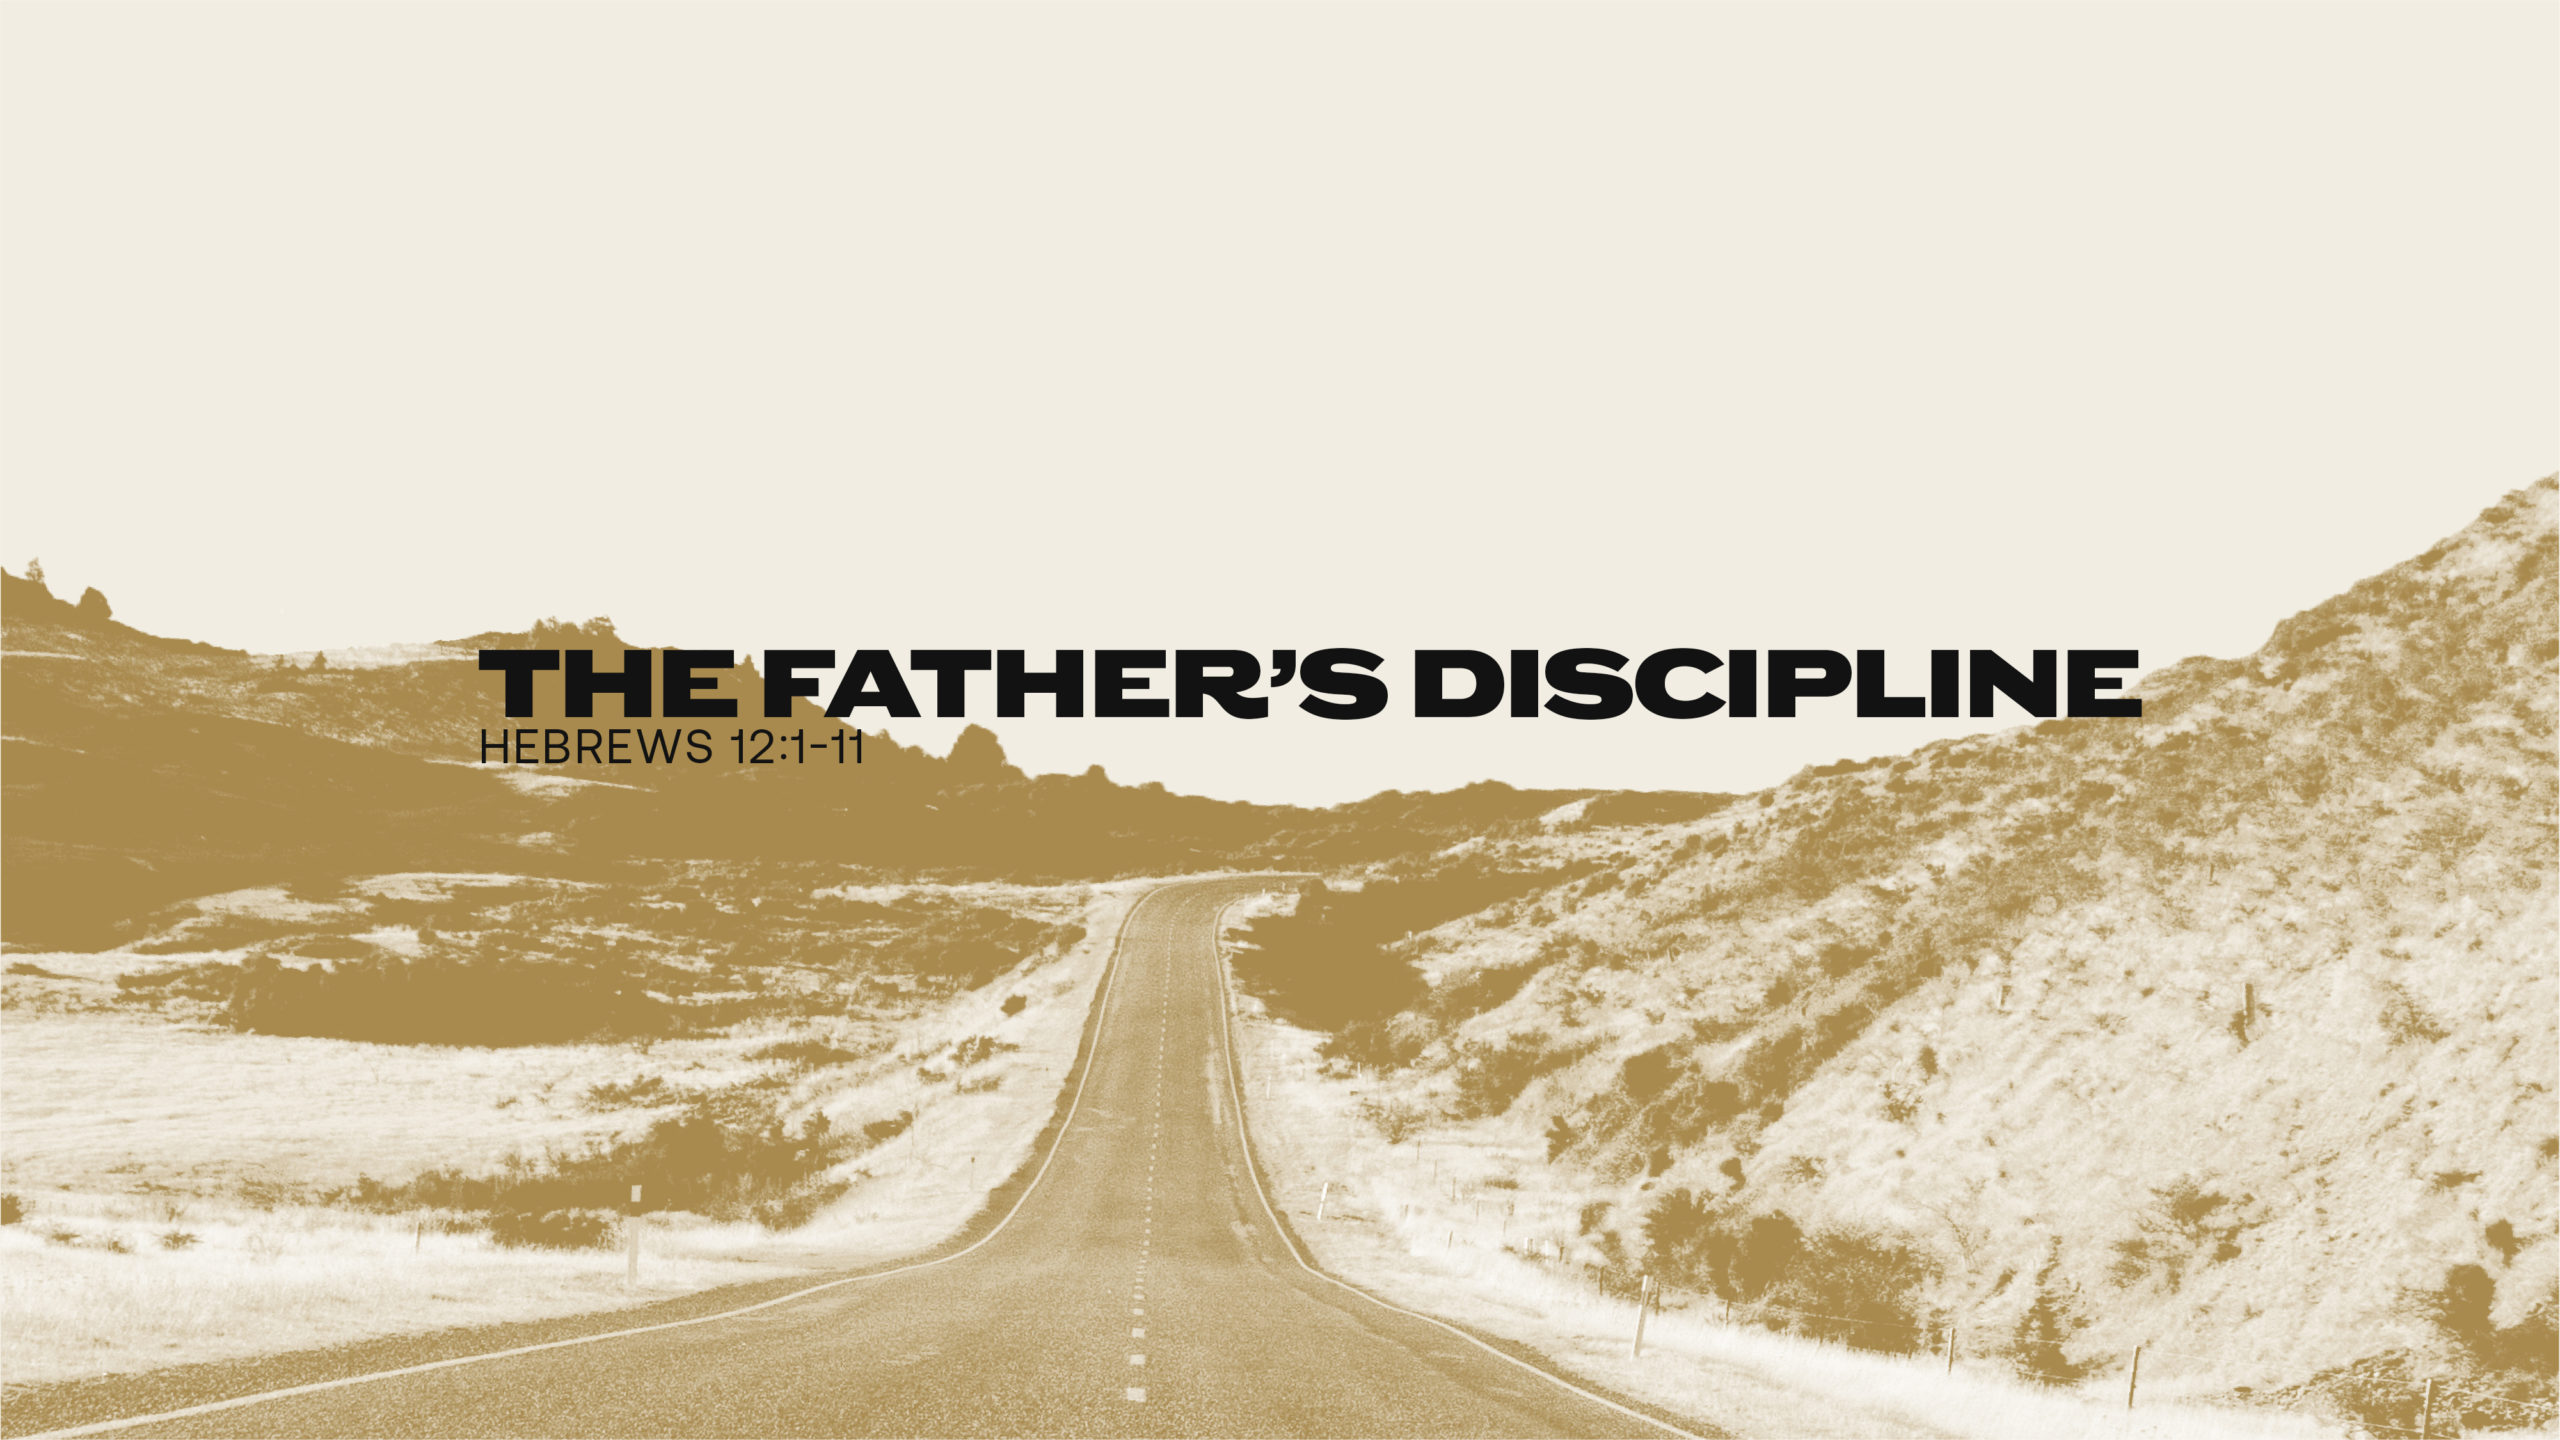 The Father’s Discipline